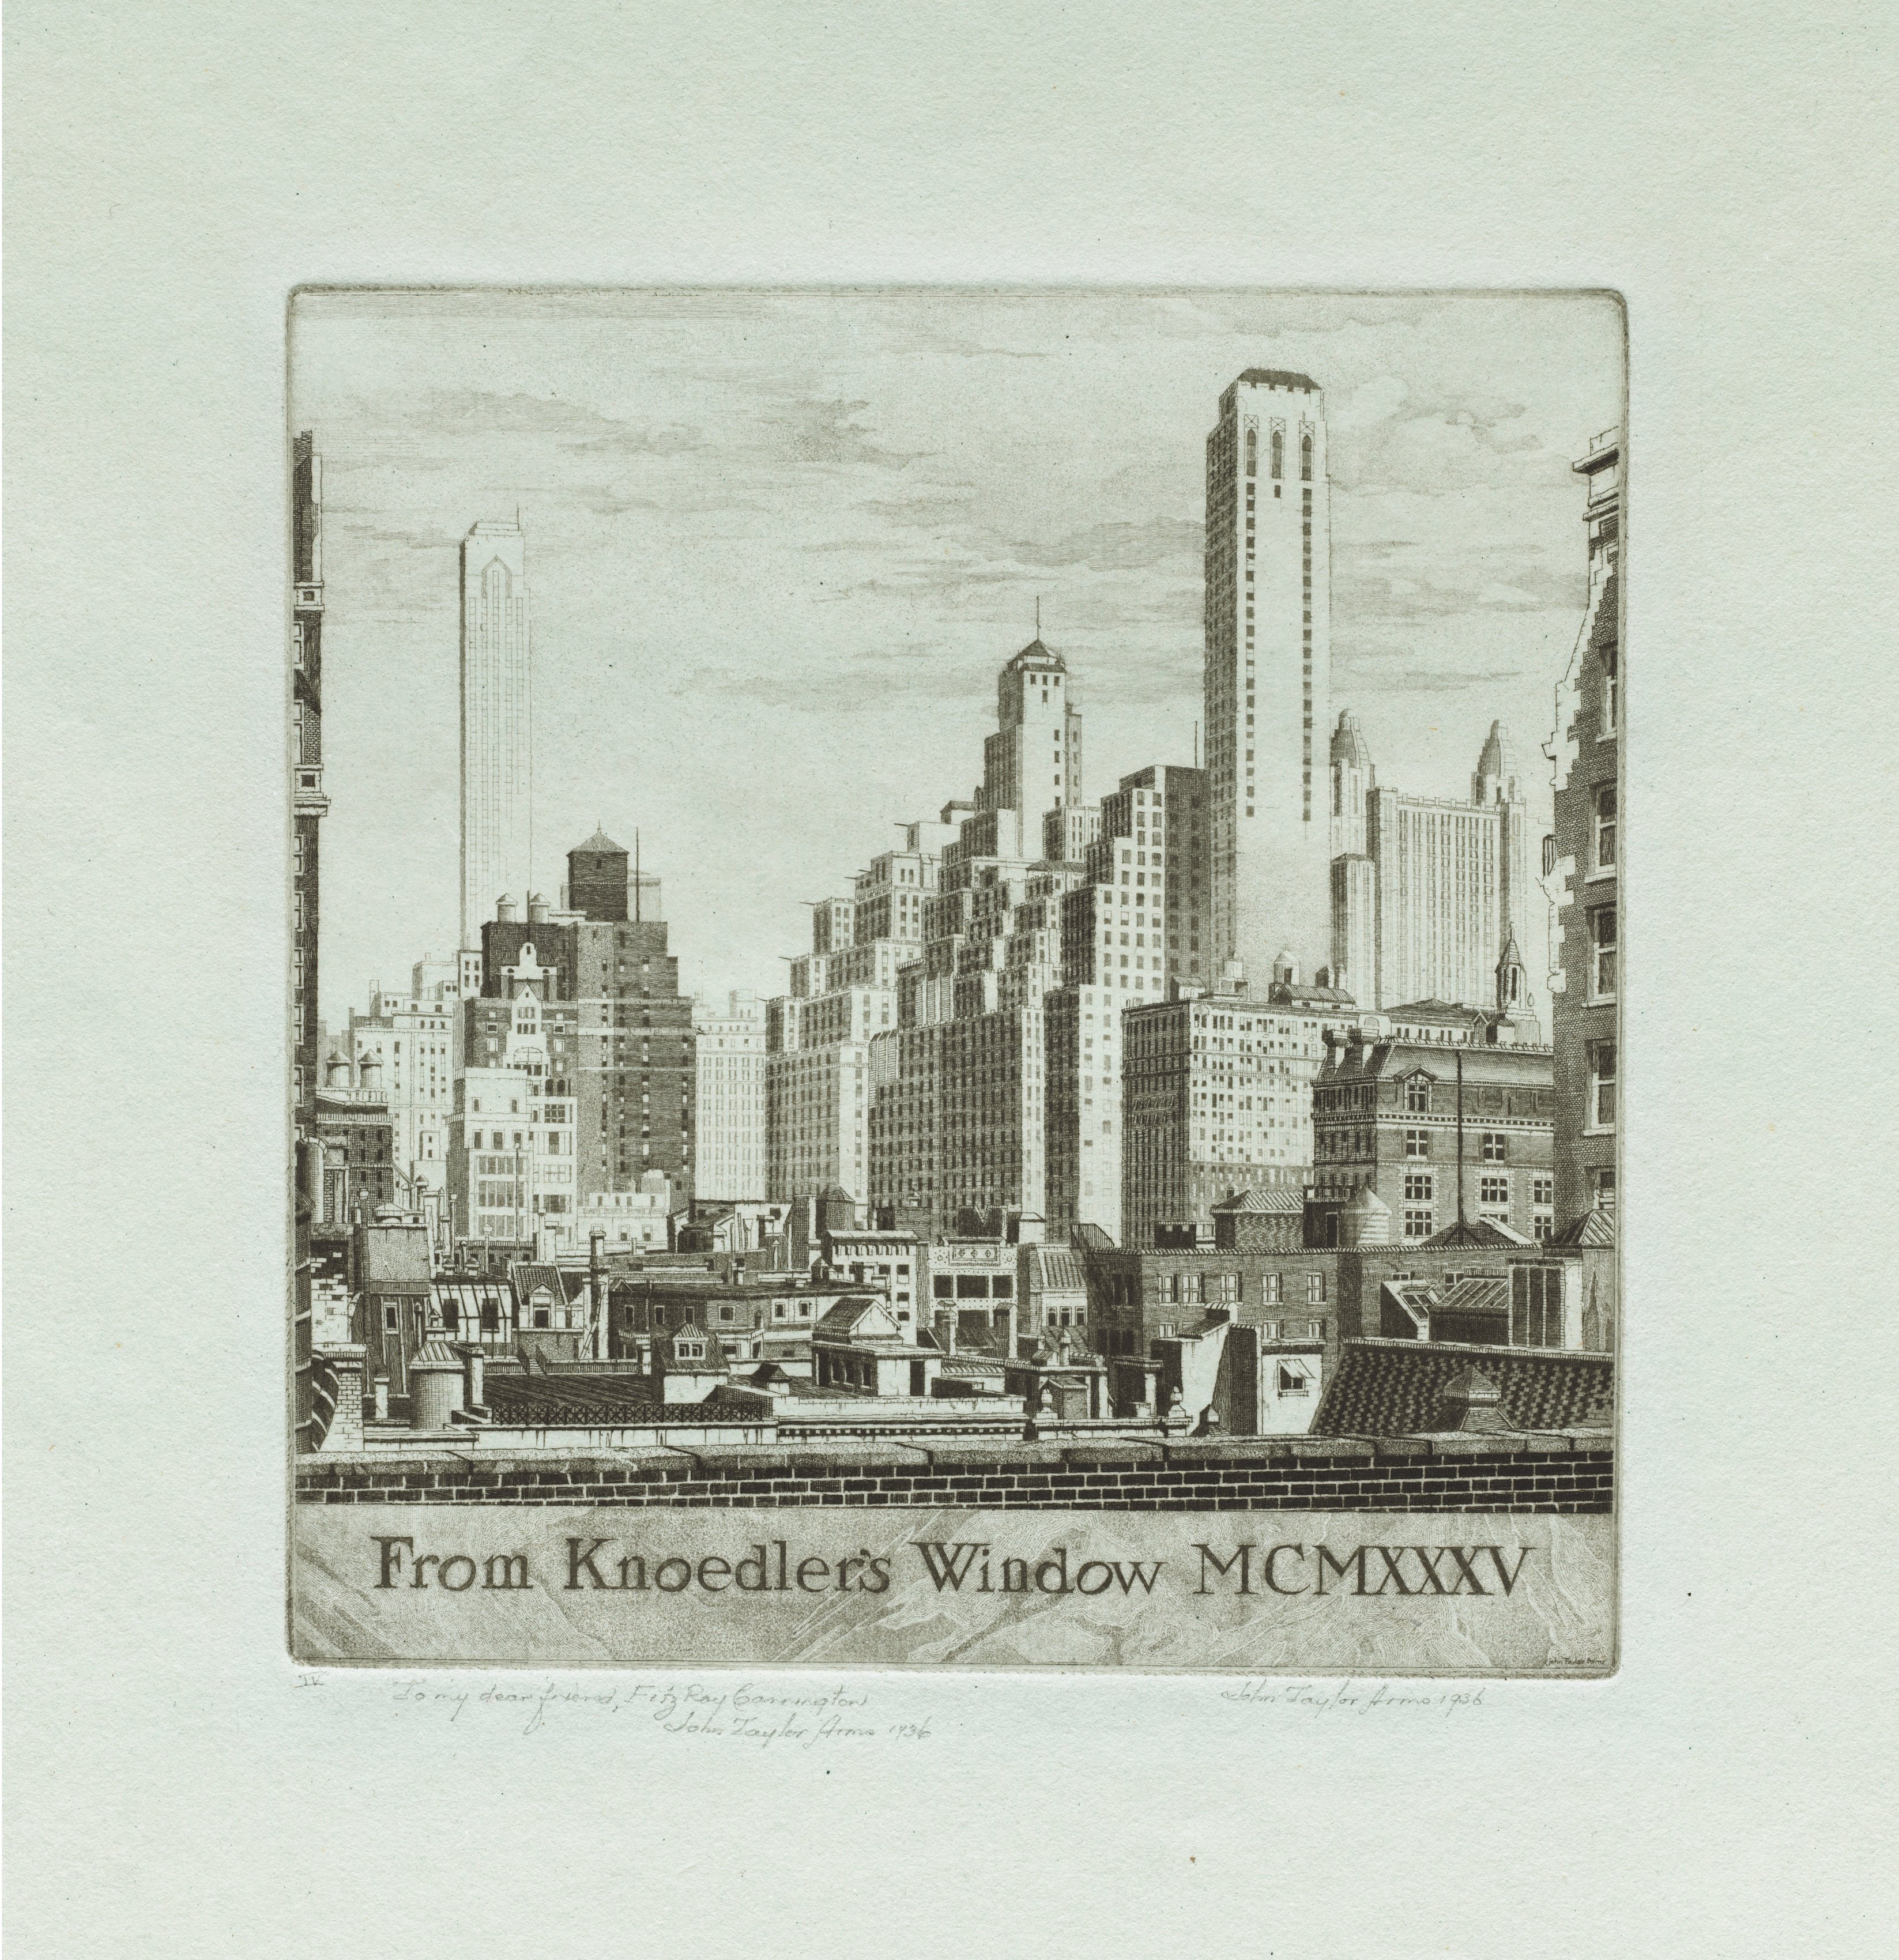 Commission: From Knoedler's Window, MCMXXXV